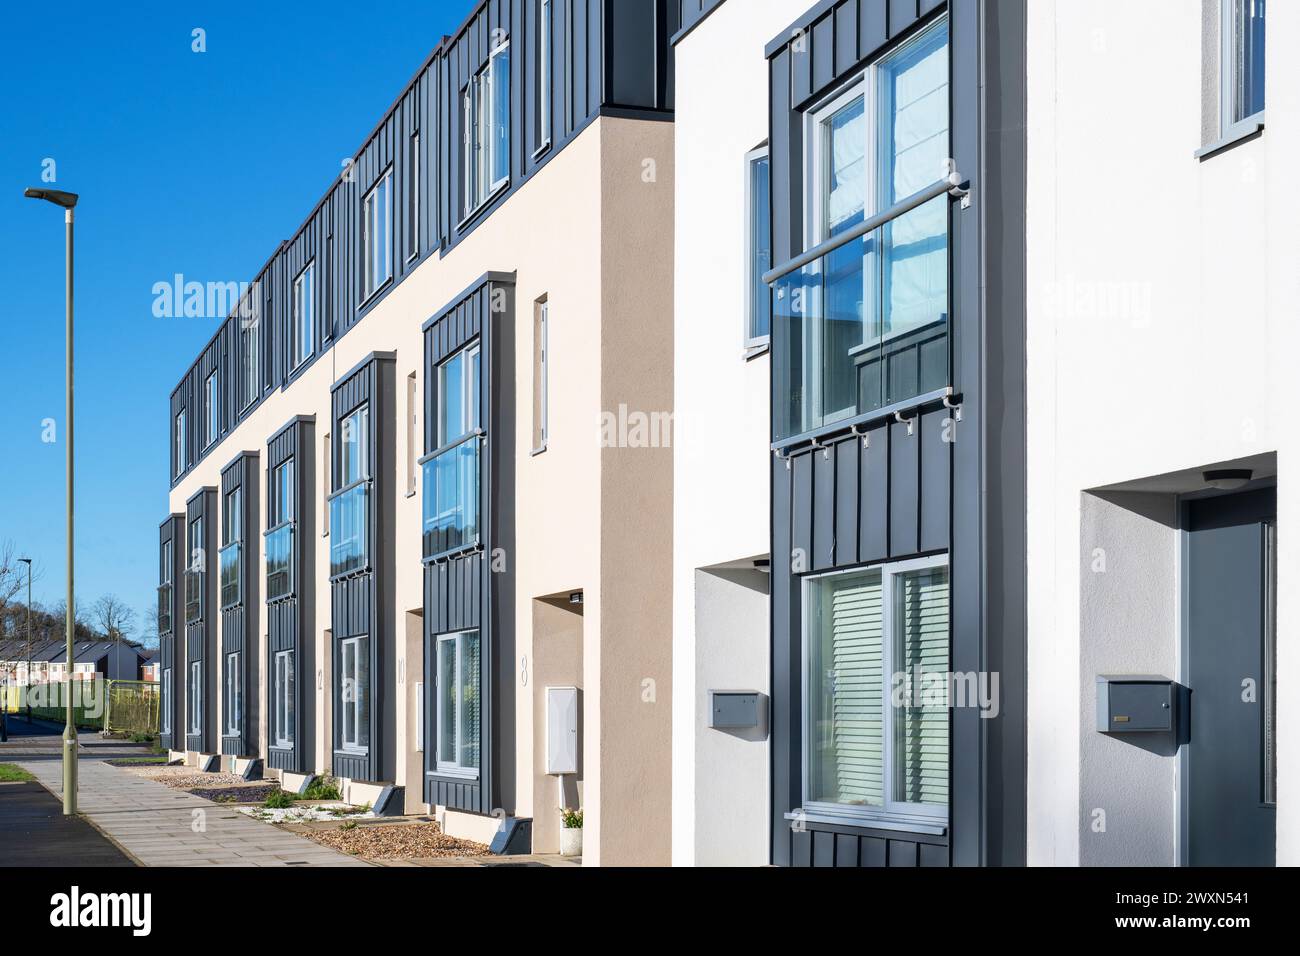 Affordable Housing. Graven hill, Bicester, Oxfordshire, England Stock Photo